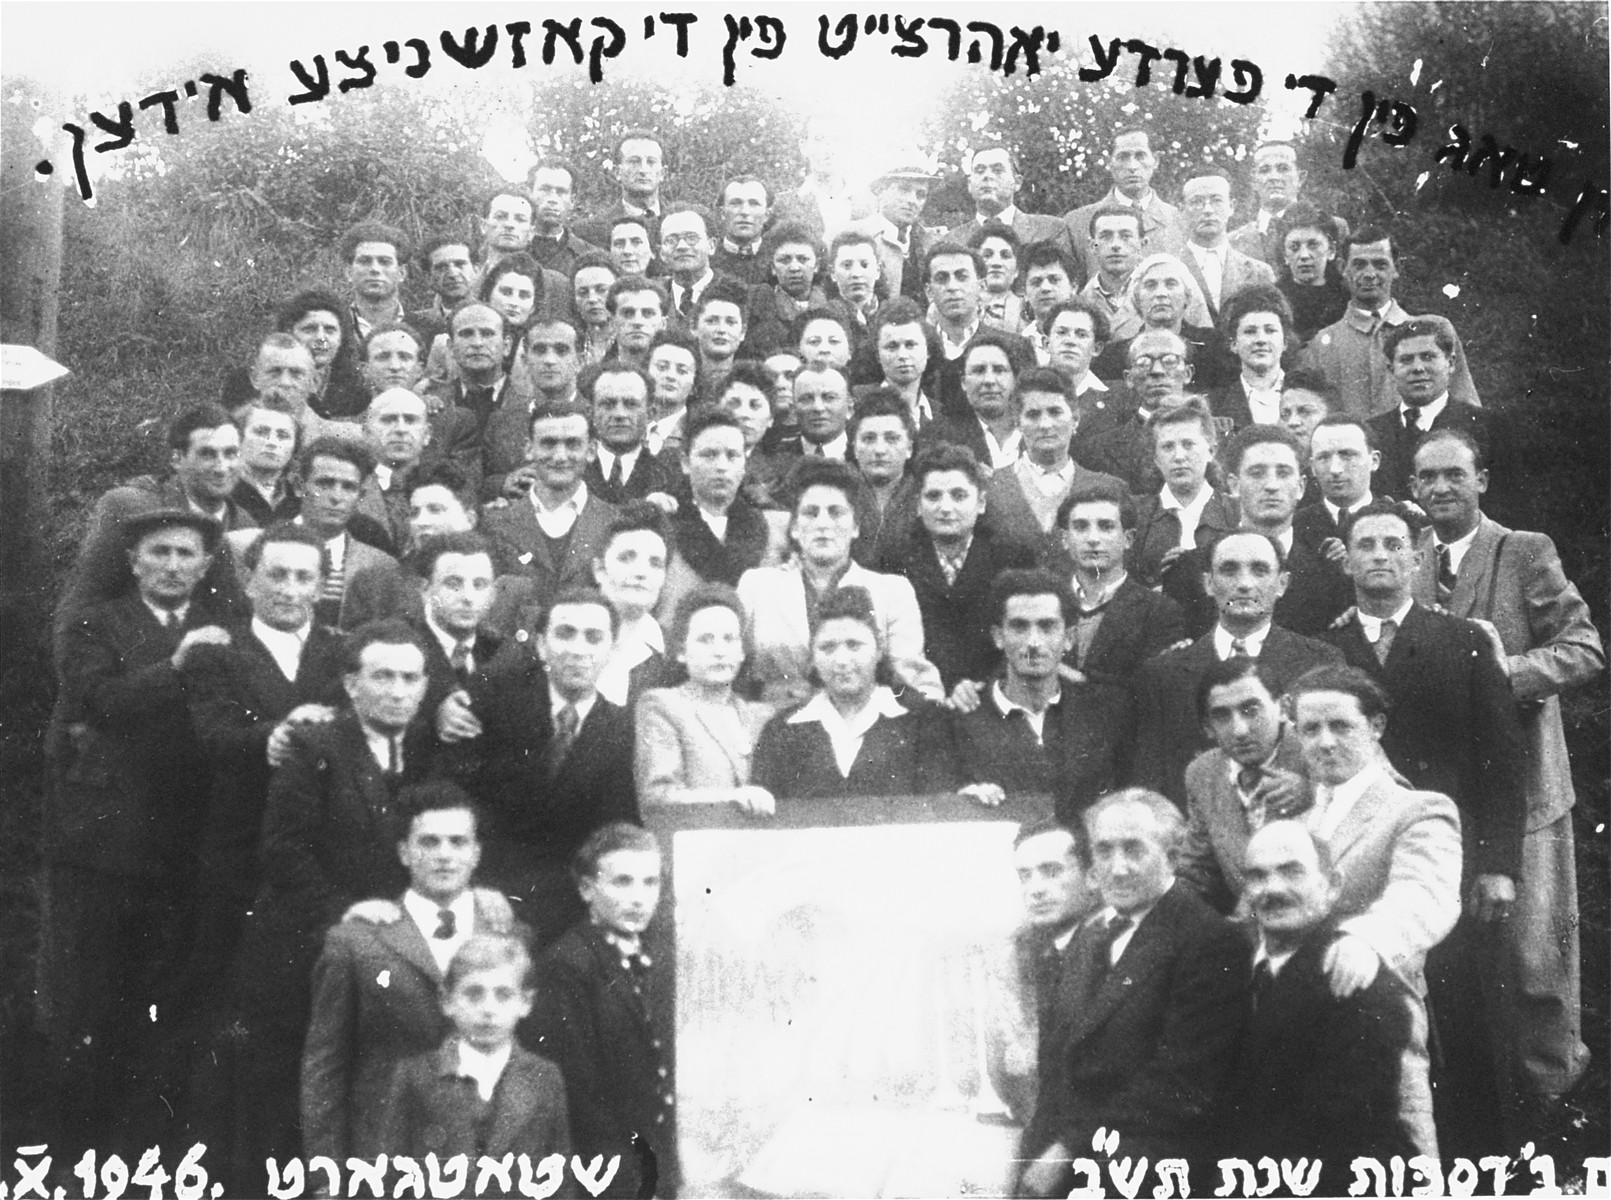 Group portrait of survivors from Kozienice at a memorial service for the community held in Stuttgart, Germany.